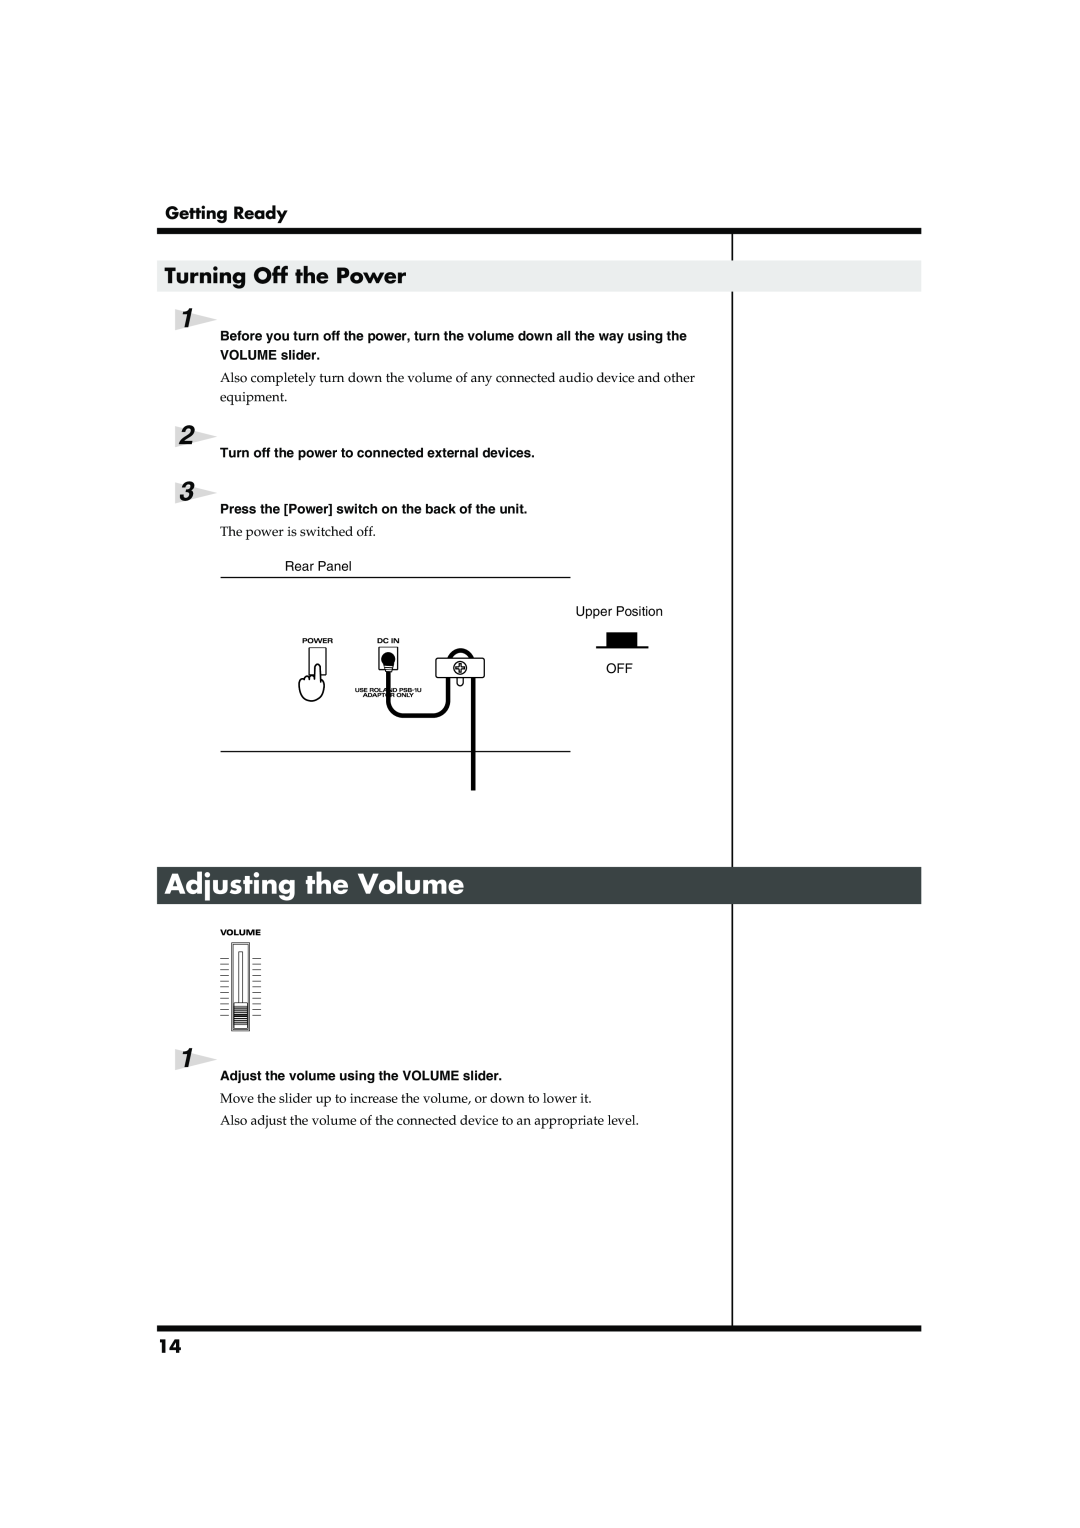 Roland RD-300SX owner manual Adjusting the Volume, Turning Off the Power, Getting Ready, VOLUME slider 